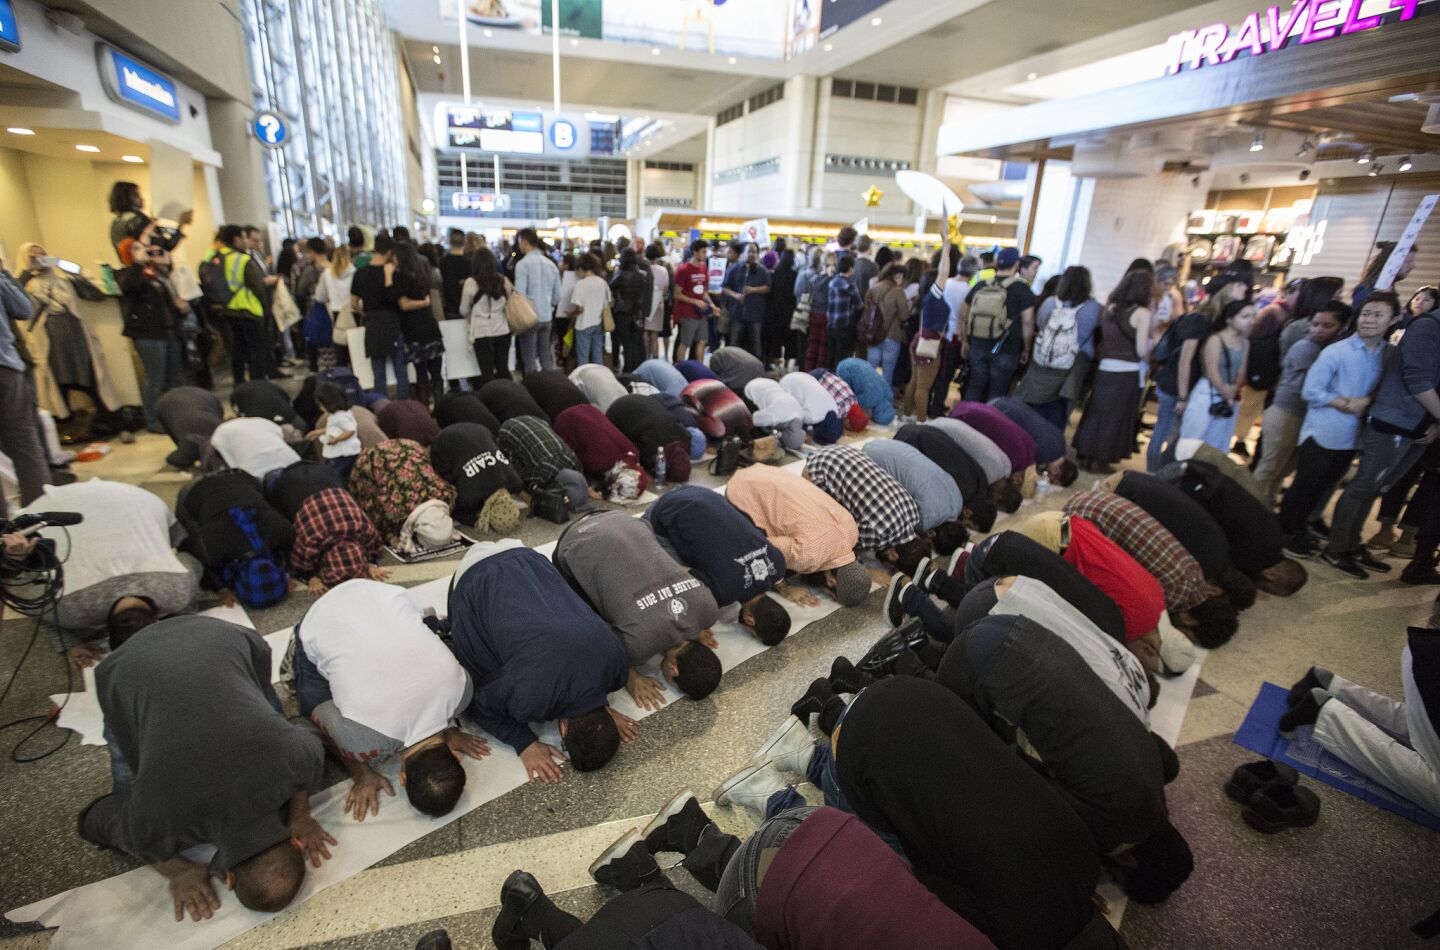 Muslims pray as hundreds stand in support on the departure level of the Tom Bradley International Terminal during a protest against President Trump's immigration order.